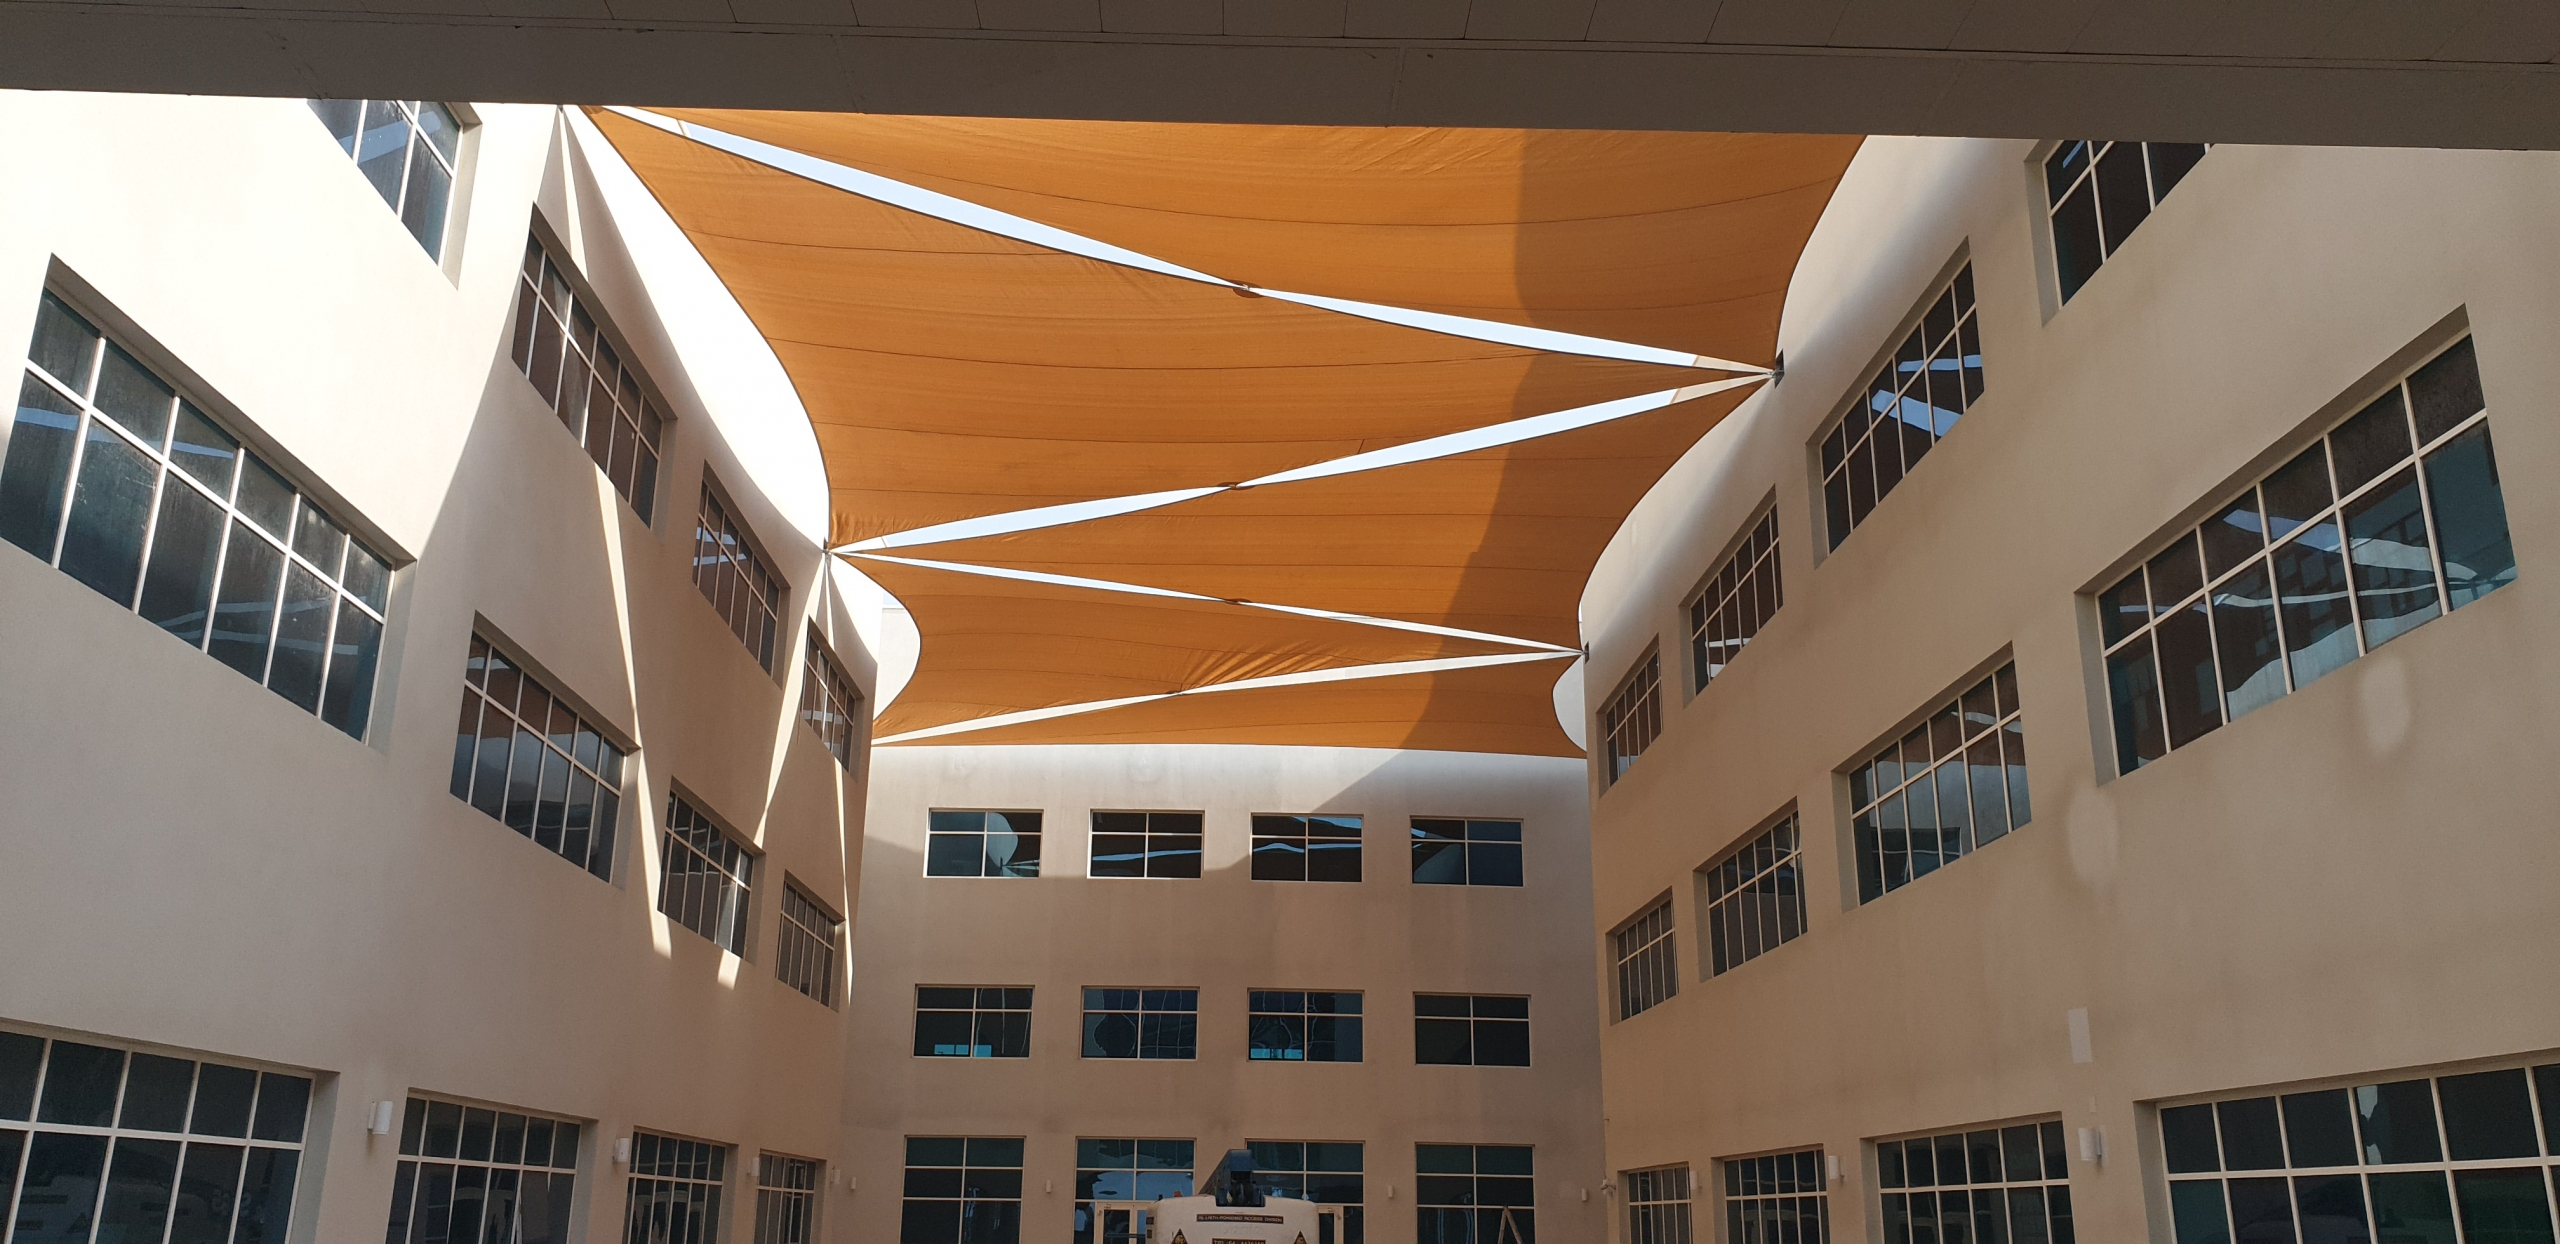 tension Shade supplier in UAE